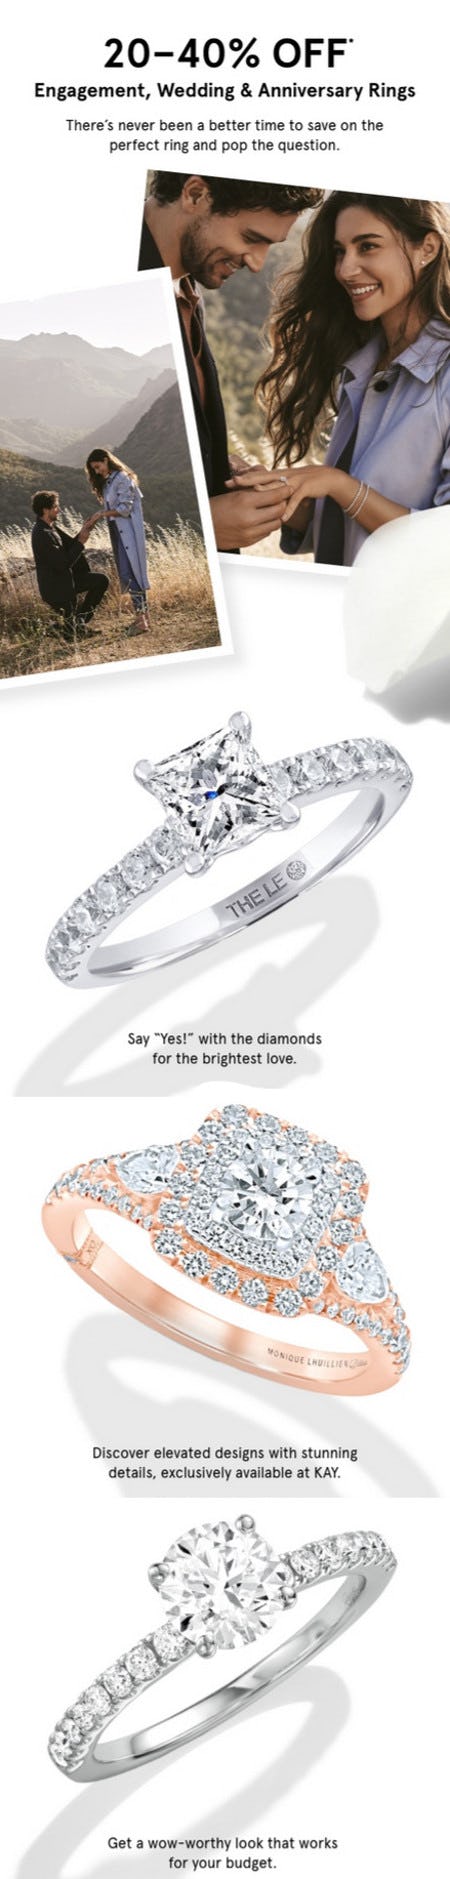 20-40% Off Engagement, Wedding and Anniversary Rings from Kay Jewelers